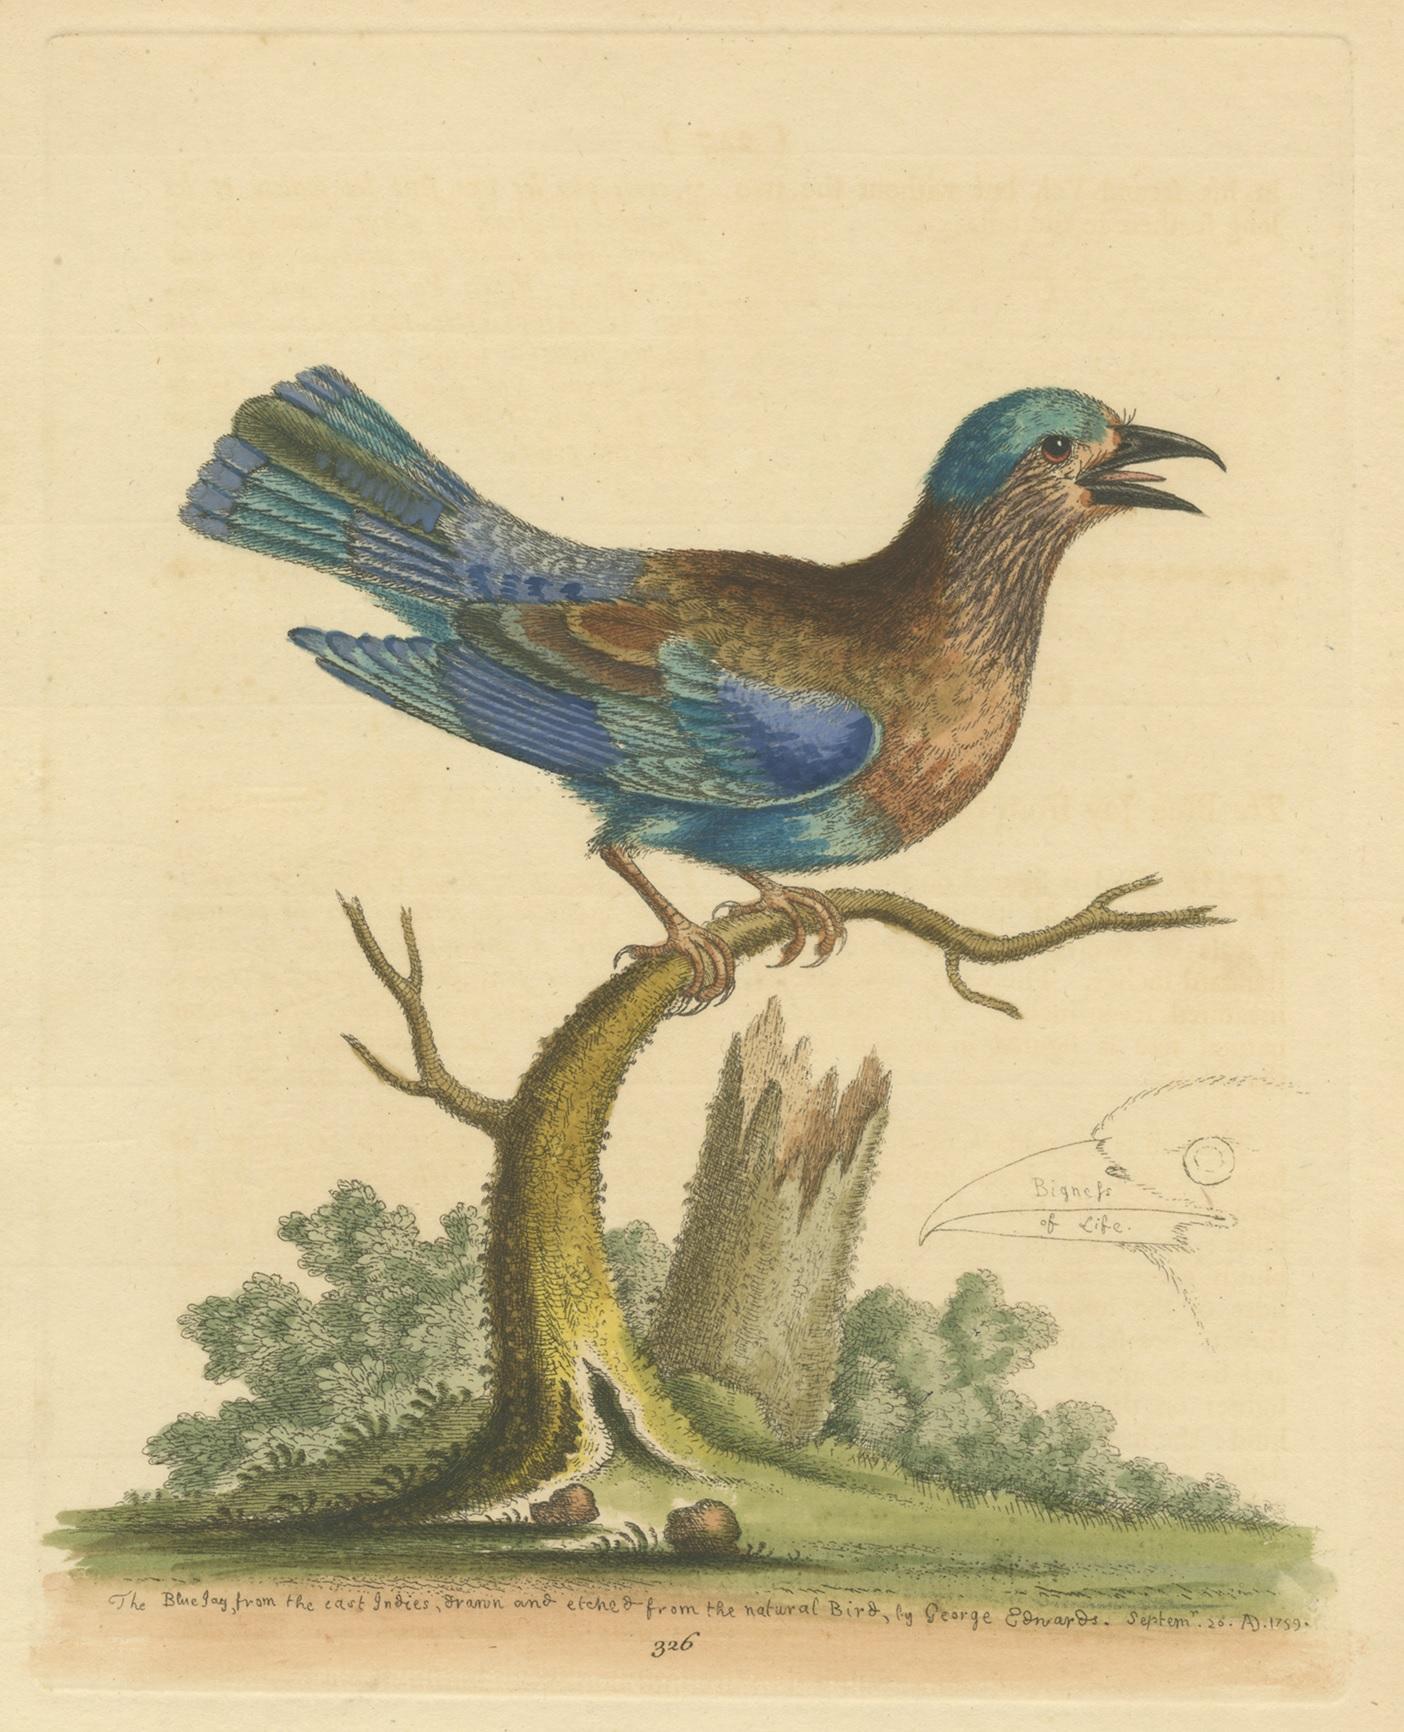 Antique bird print titled 'The Blue Jay from the East Indies (..)'. Old bird print depicting the blue jay (Cyanocitta cristata). This print originates from 'A Natural History of Uncommon Birds' by George Edwards.